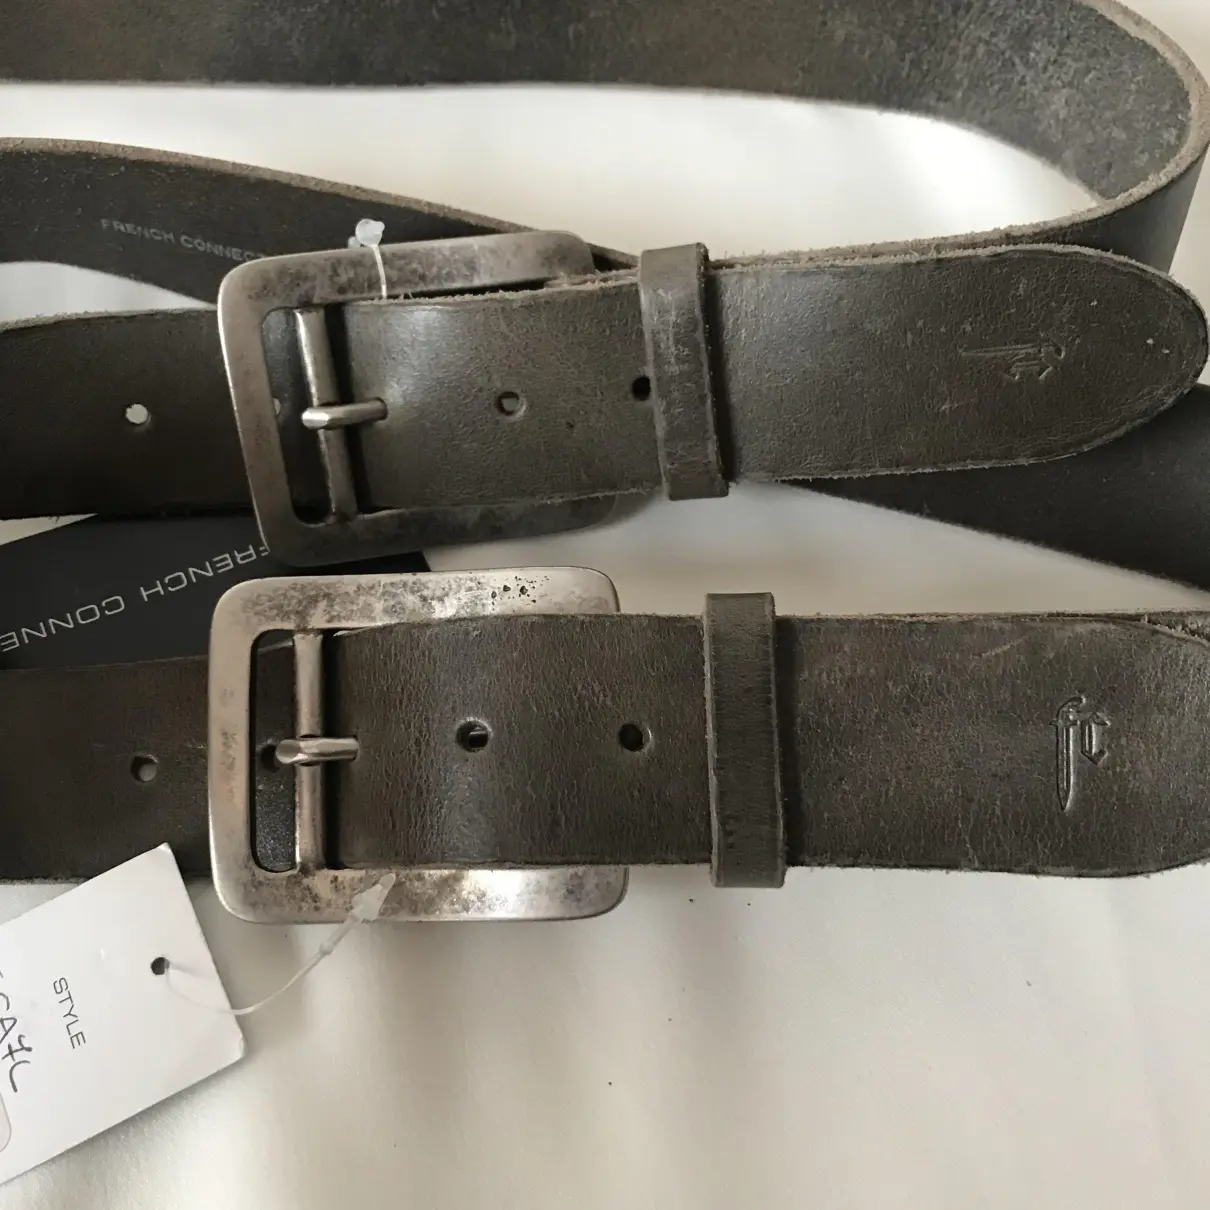 Buy French Connection Leather belt online